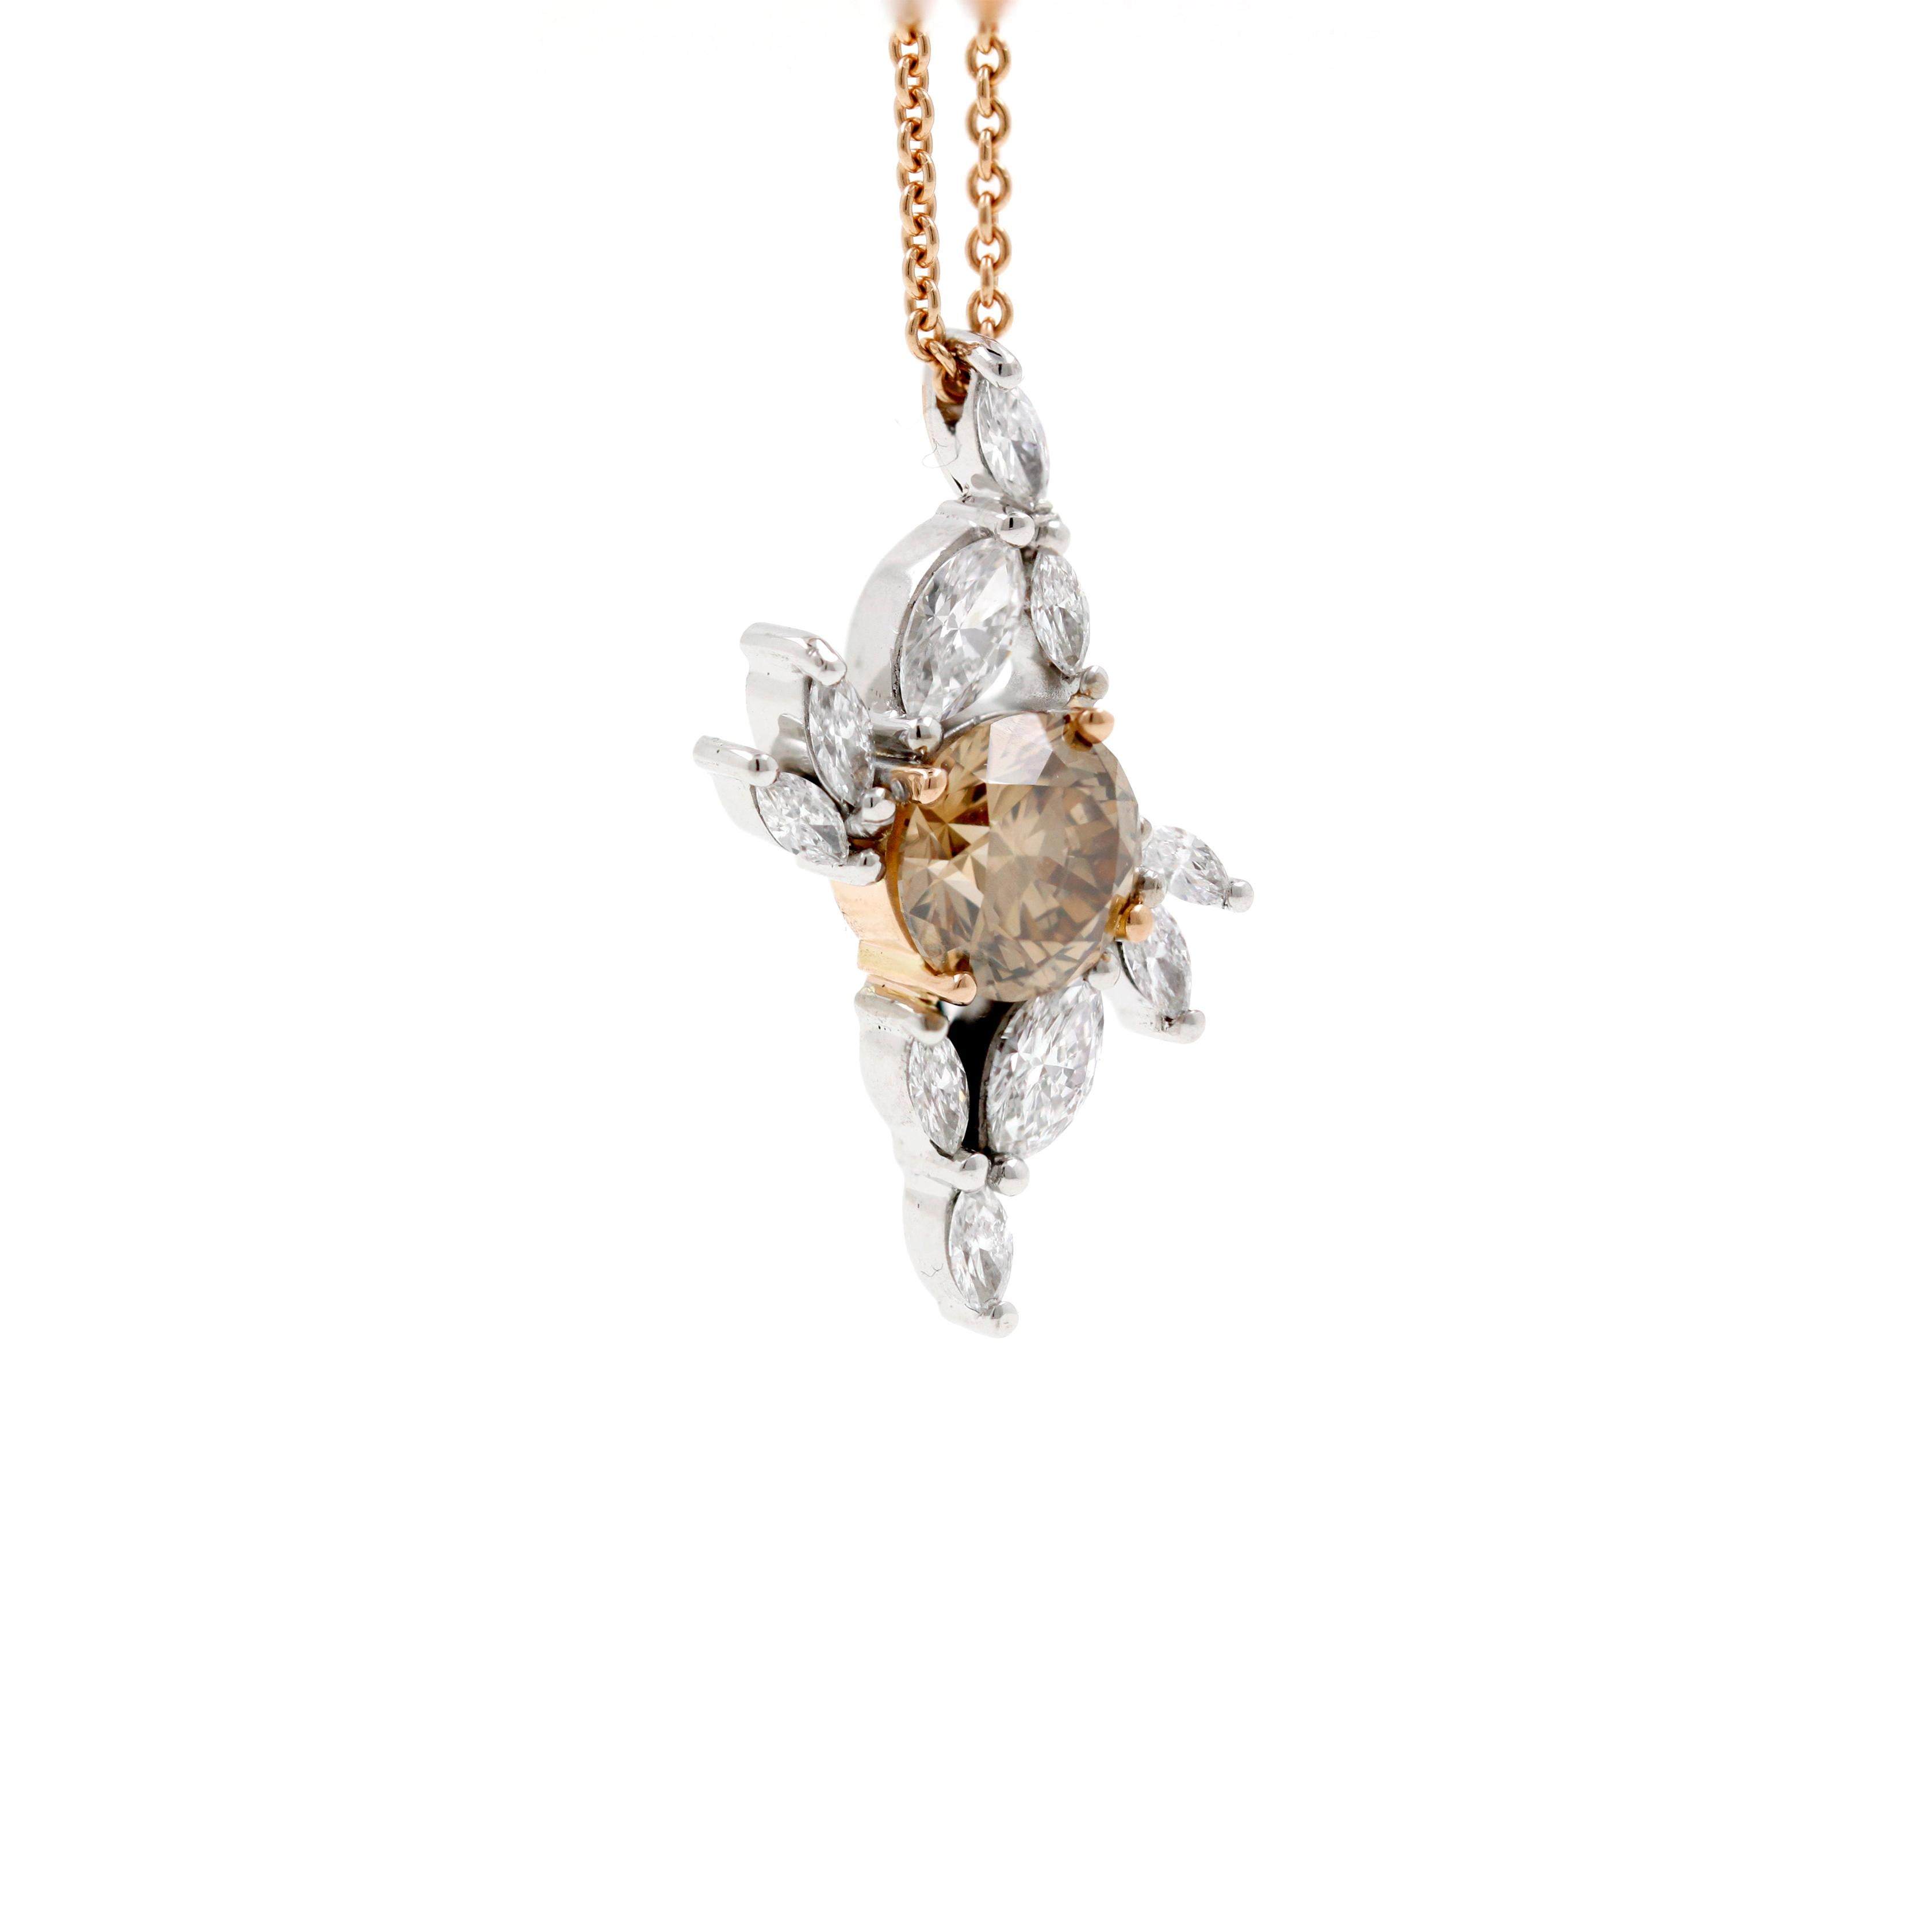 One handcrafted 18ct white and rose gold pendant, featuring a 1.16ct Argyle Champagne round brilliant cut diamond of C5 colour and VS1 clarity (RTARG103903, Argyle Orignis certificate #2170A) surrounded by an asymmetrical cluster of 10=0.548ct